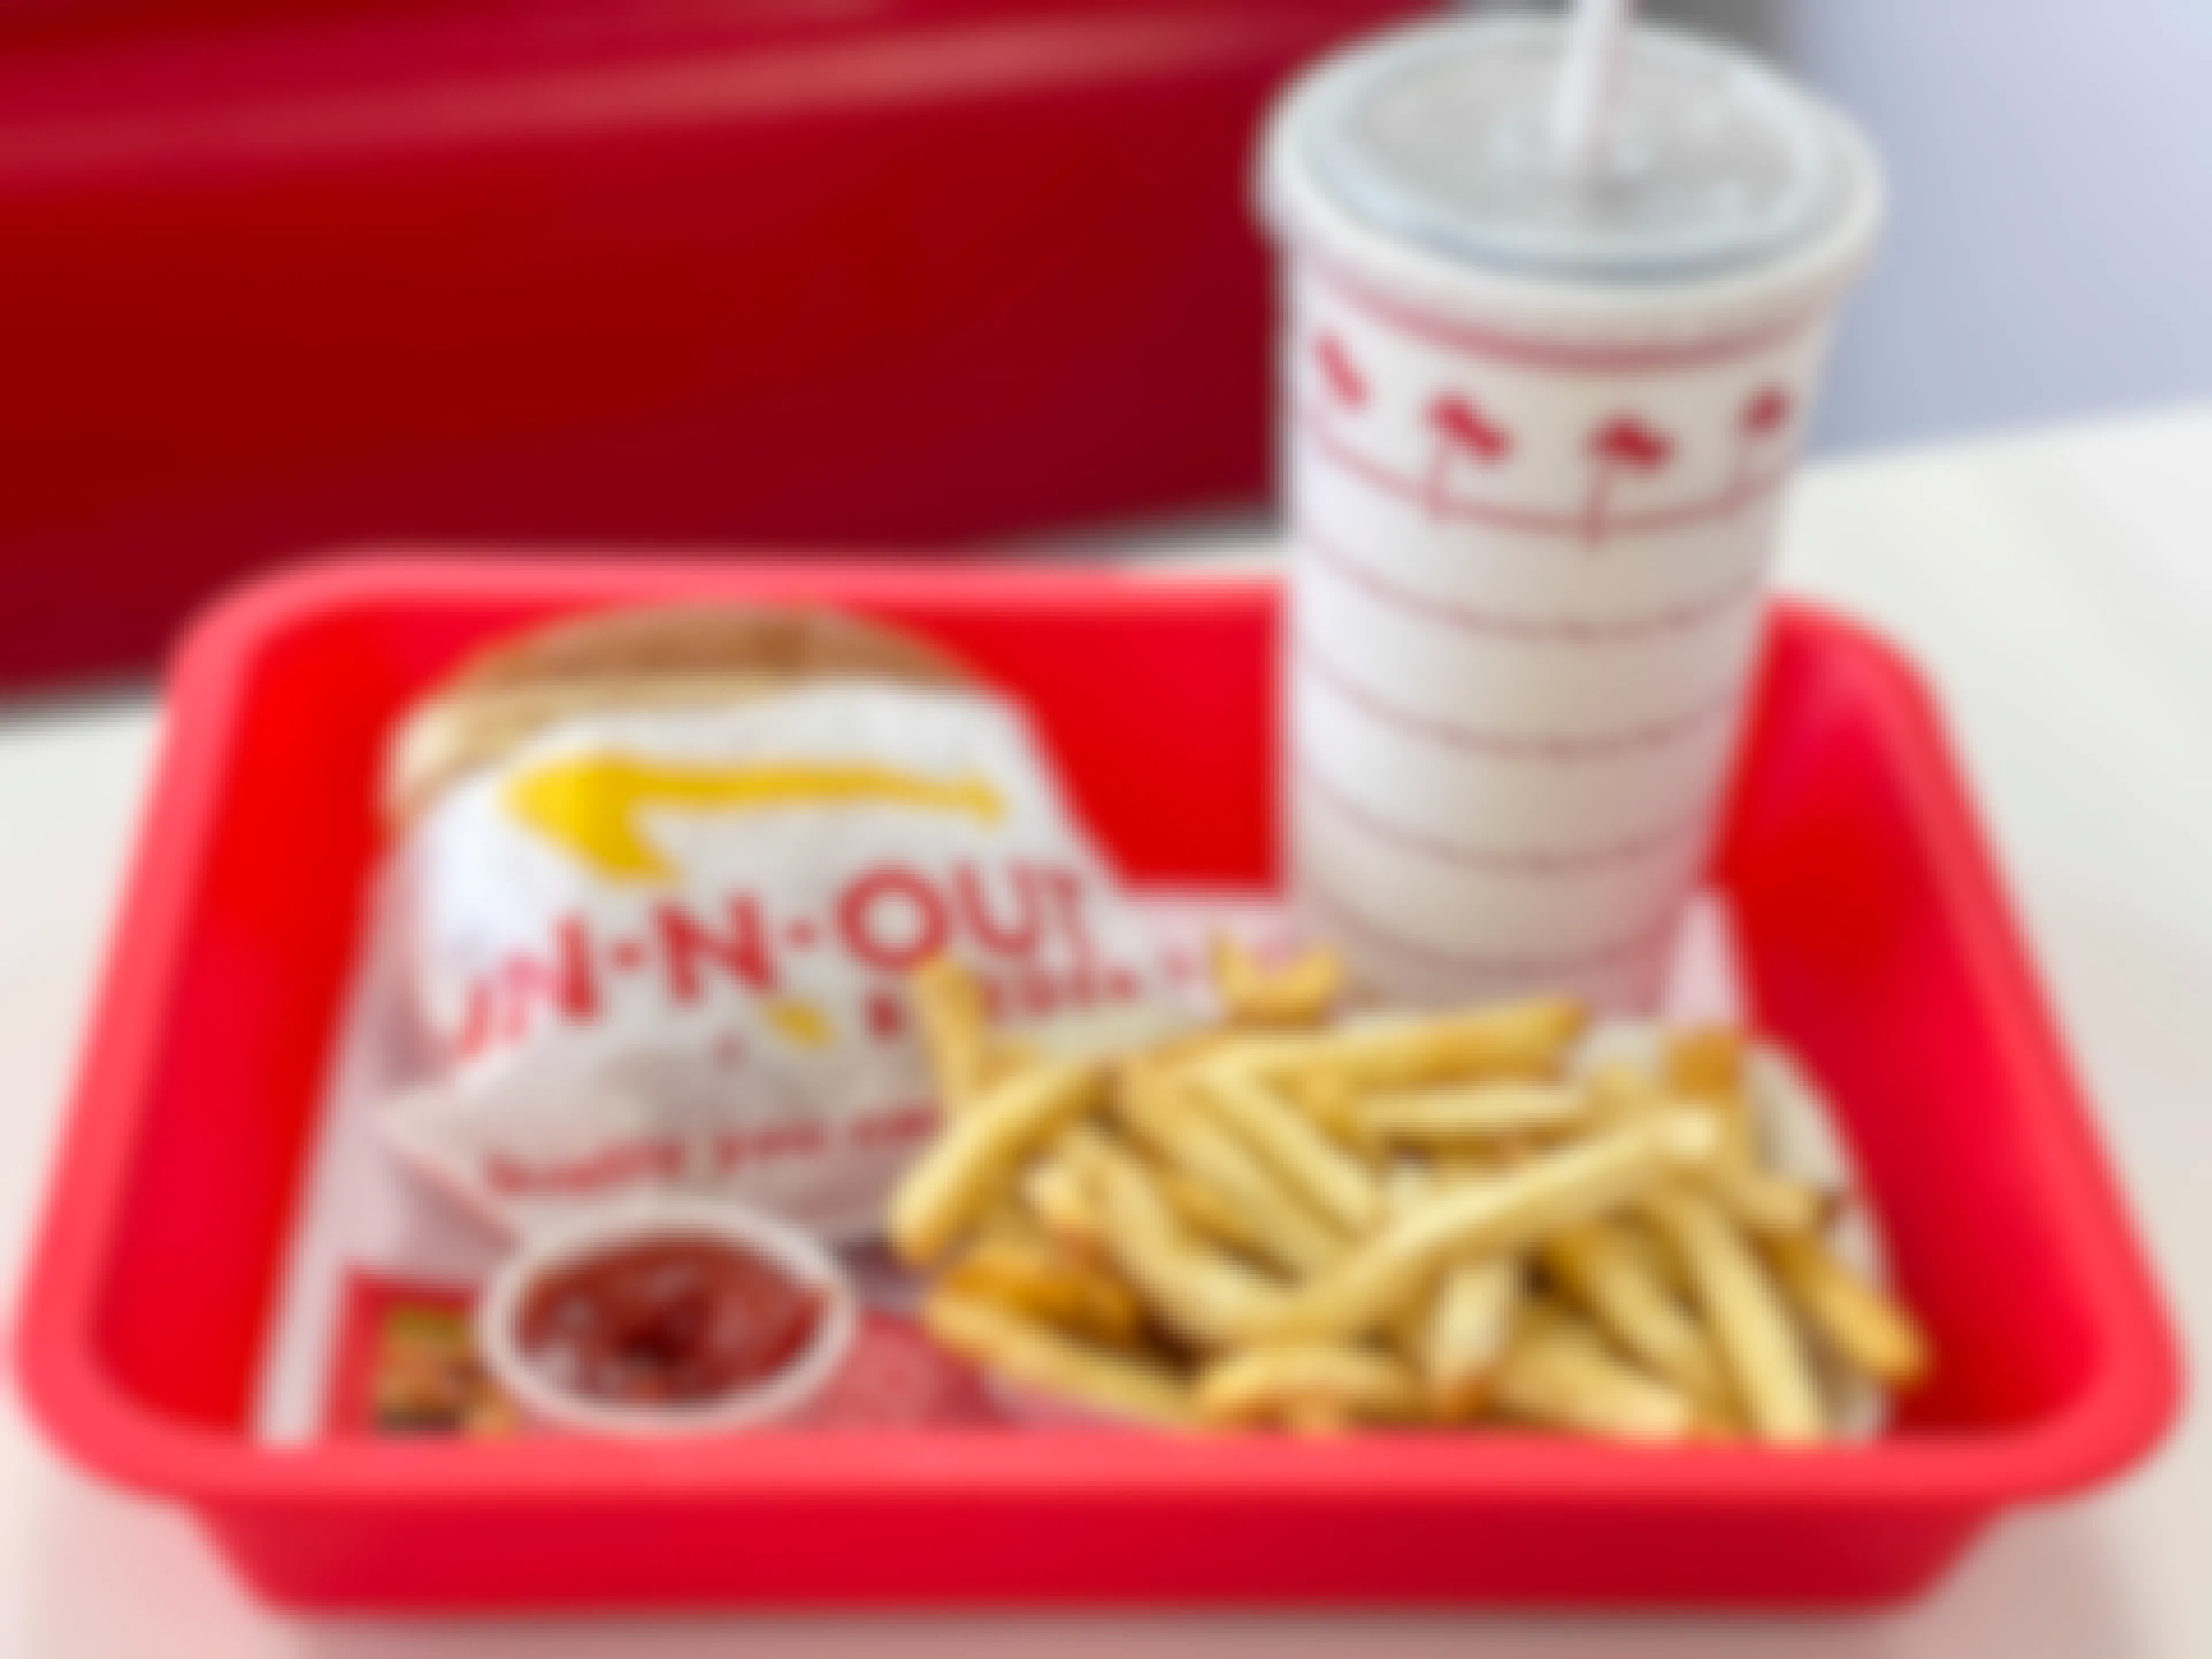 A combo meal with burger, drink, and fries on a red plastic tray at In-N-Out.